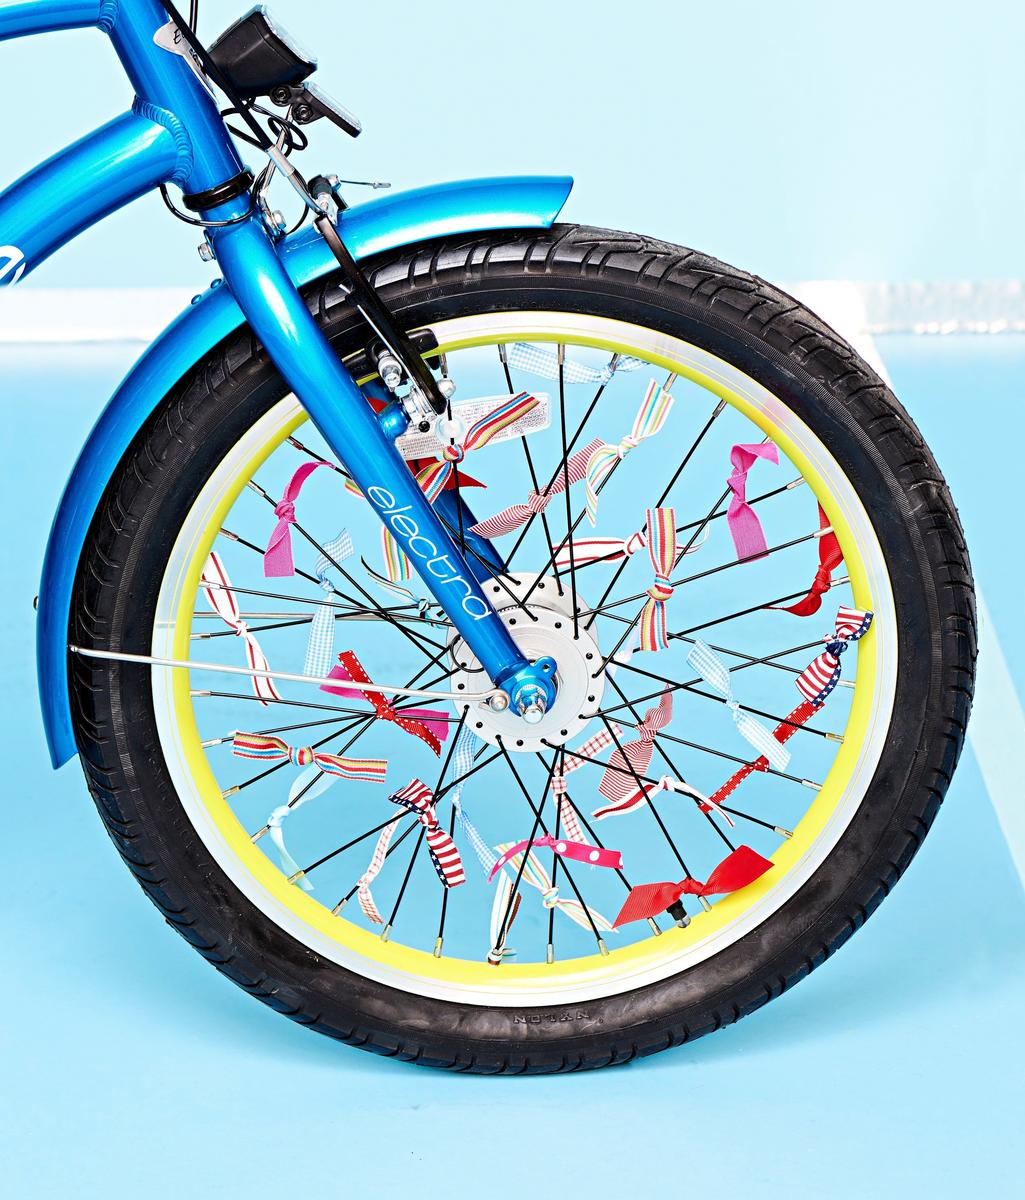 ribbons attached to spokes of blue bike